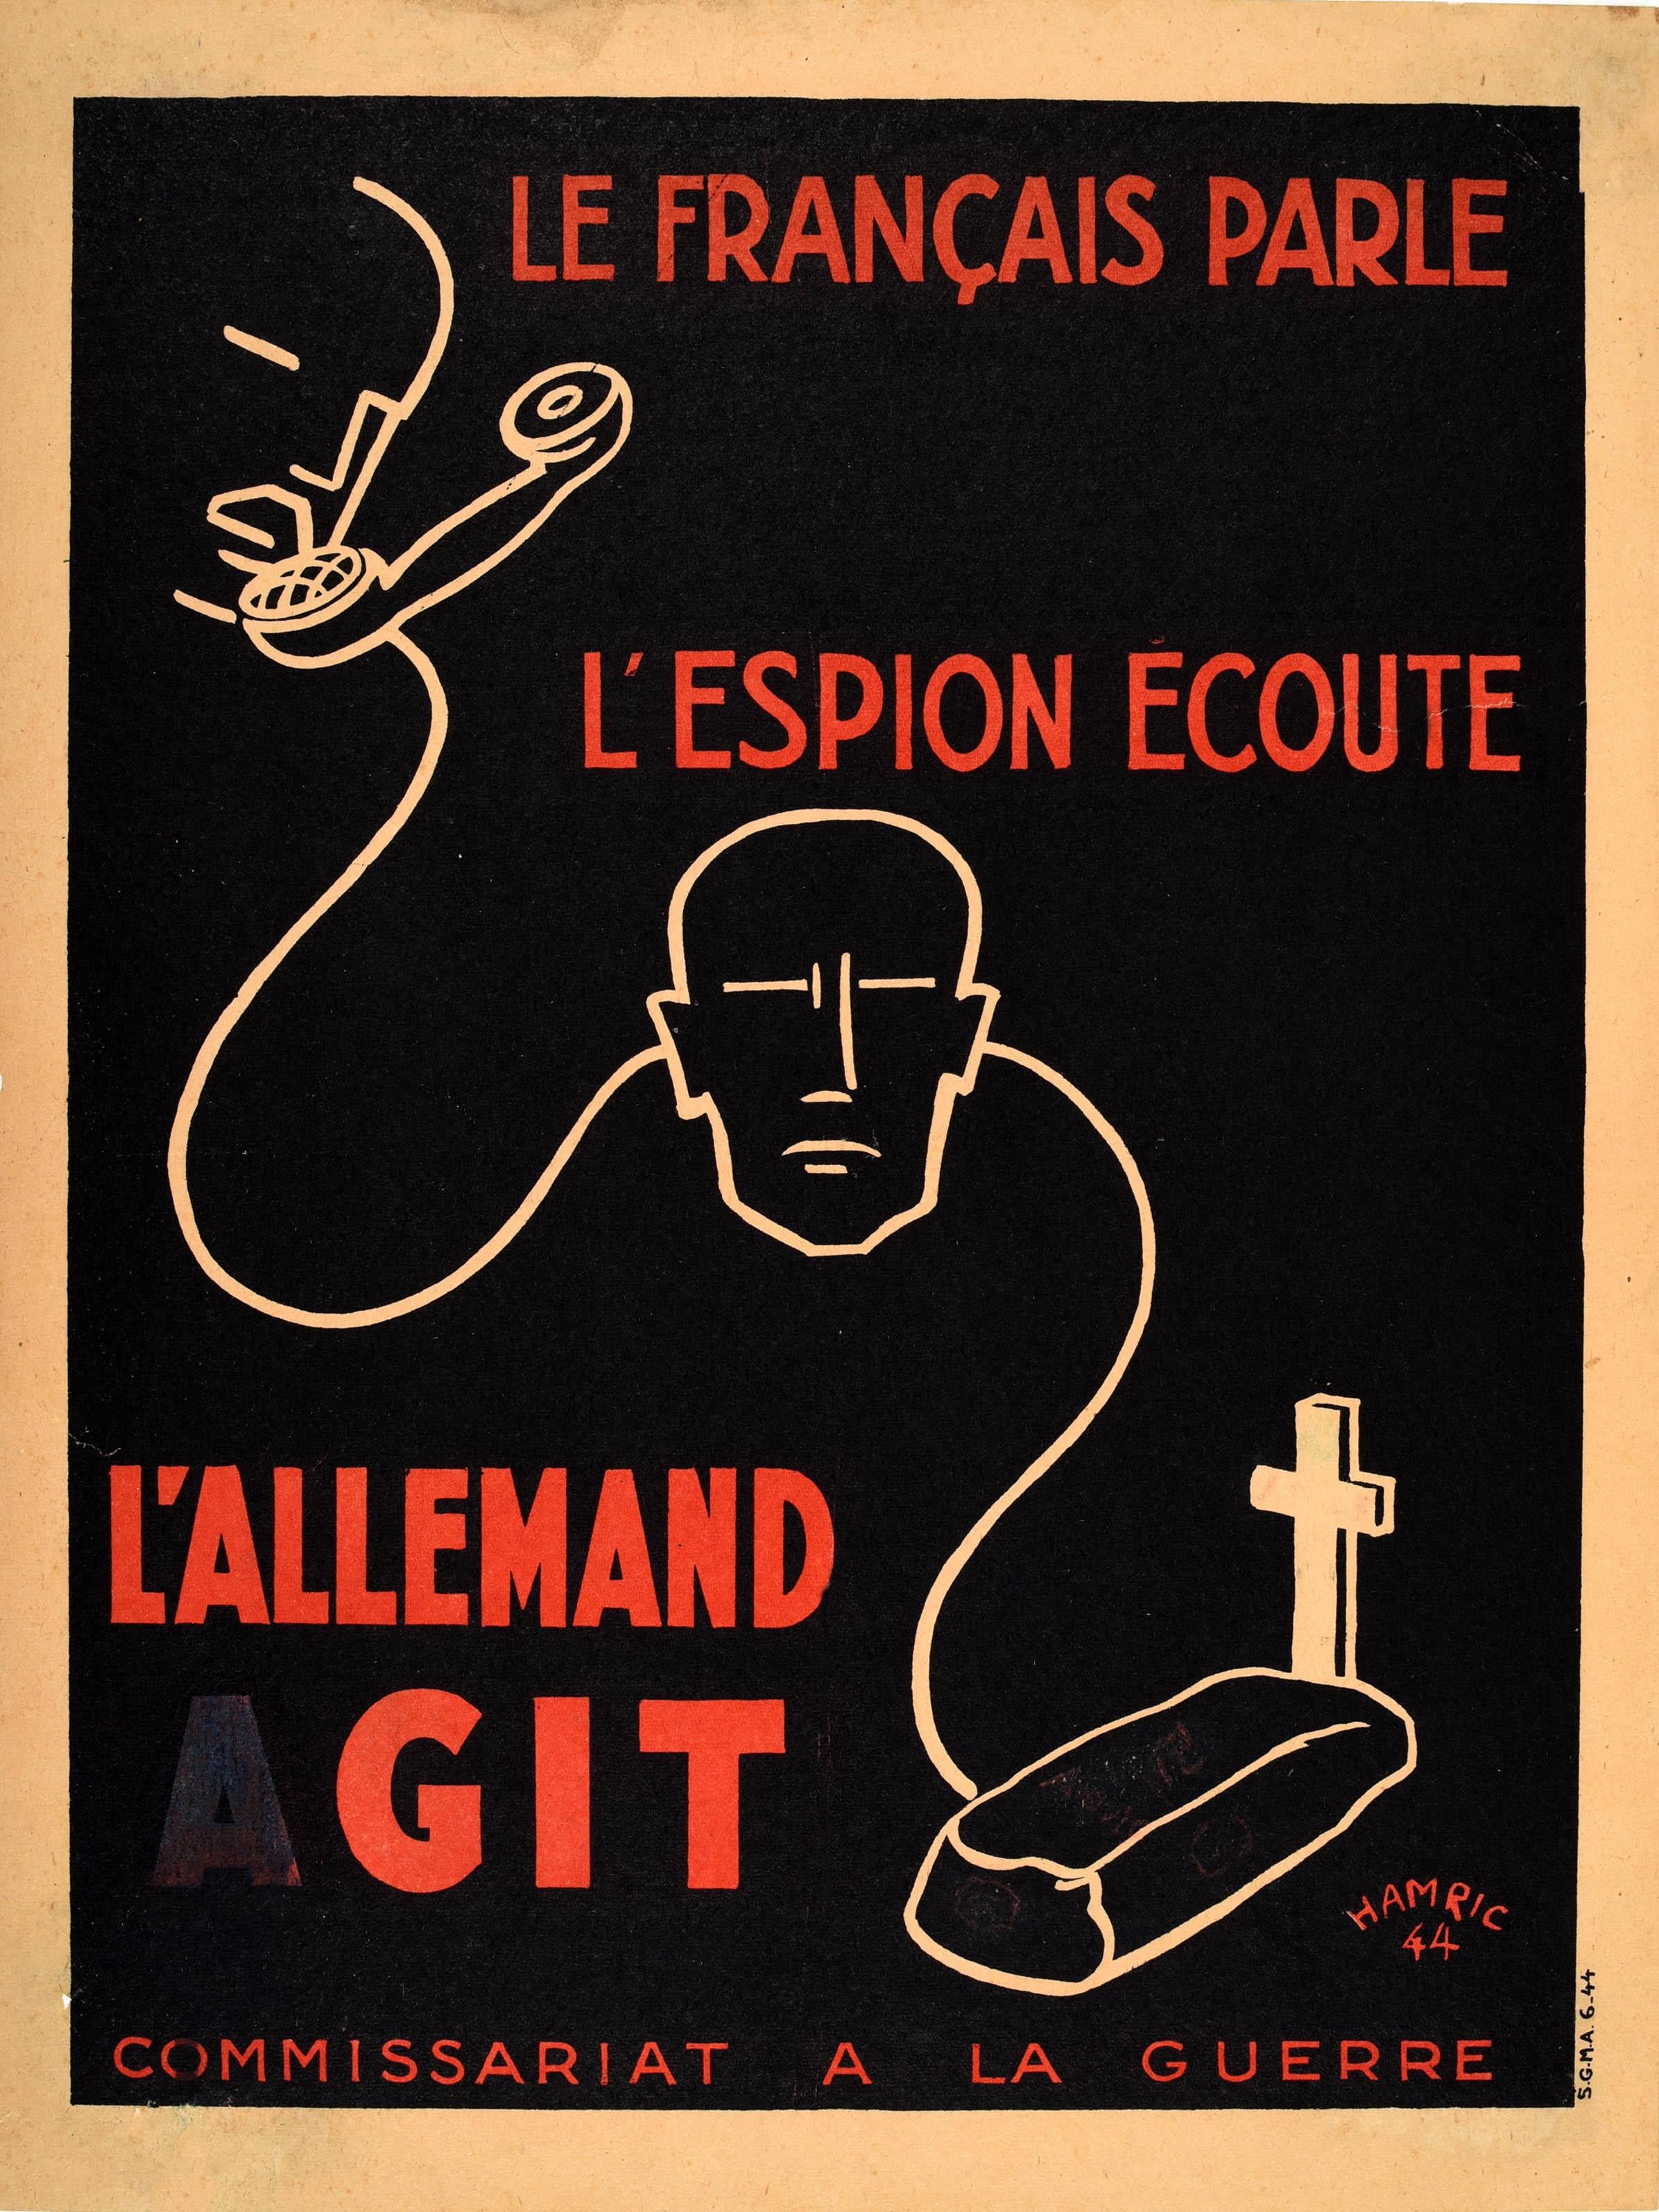 Original vintage World War Two propaganda poster - The French Speak The Spy Listens The German Acts / Le Francais Parle L'Espion Ecoute L'Allemand Agit - featuring a dynamic graphic design depicting the bold red lettering next to a drawing of a